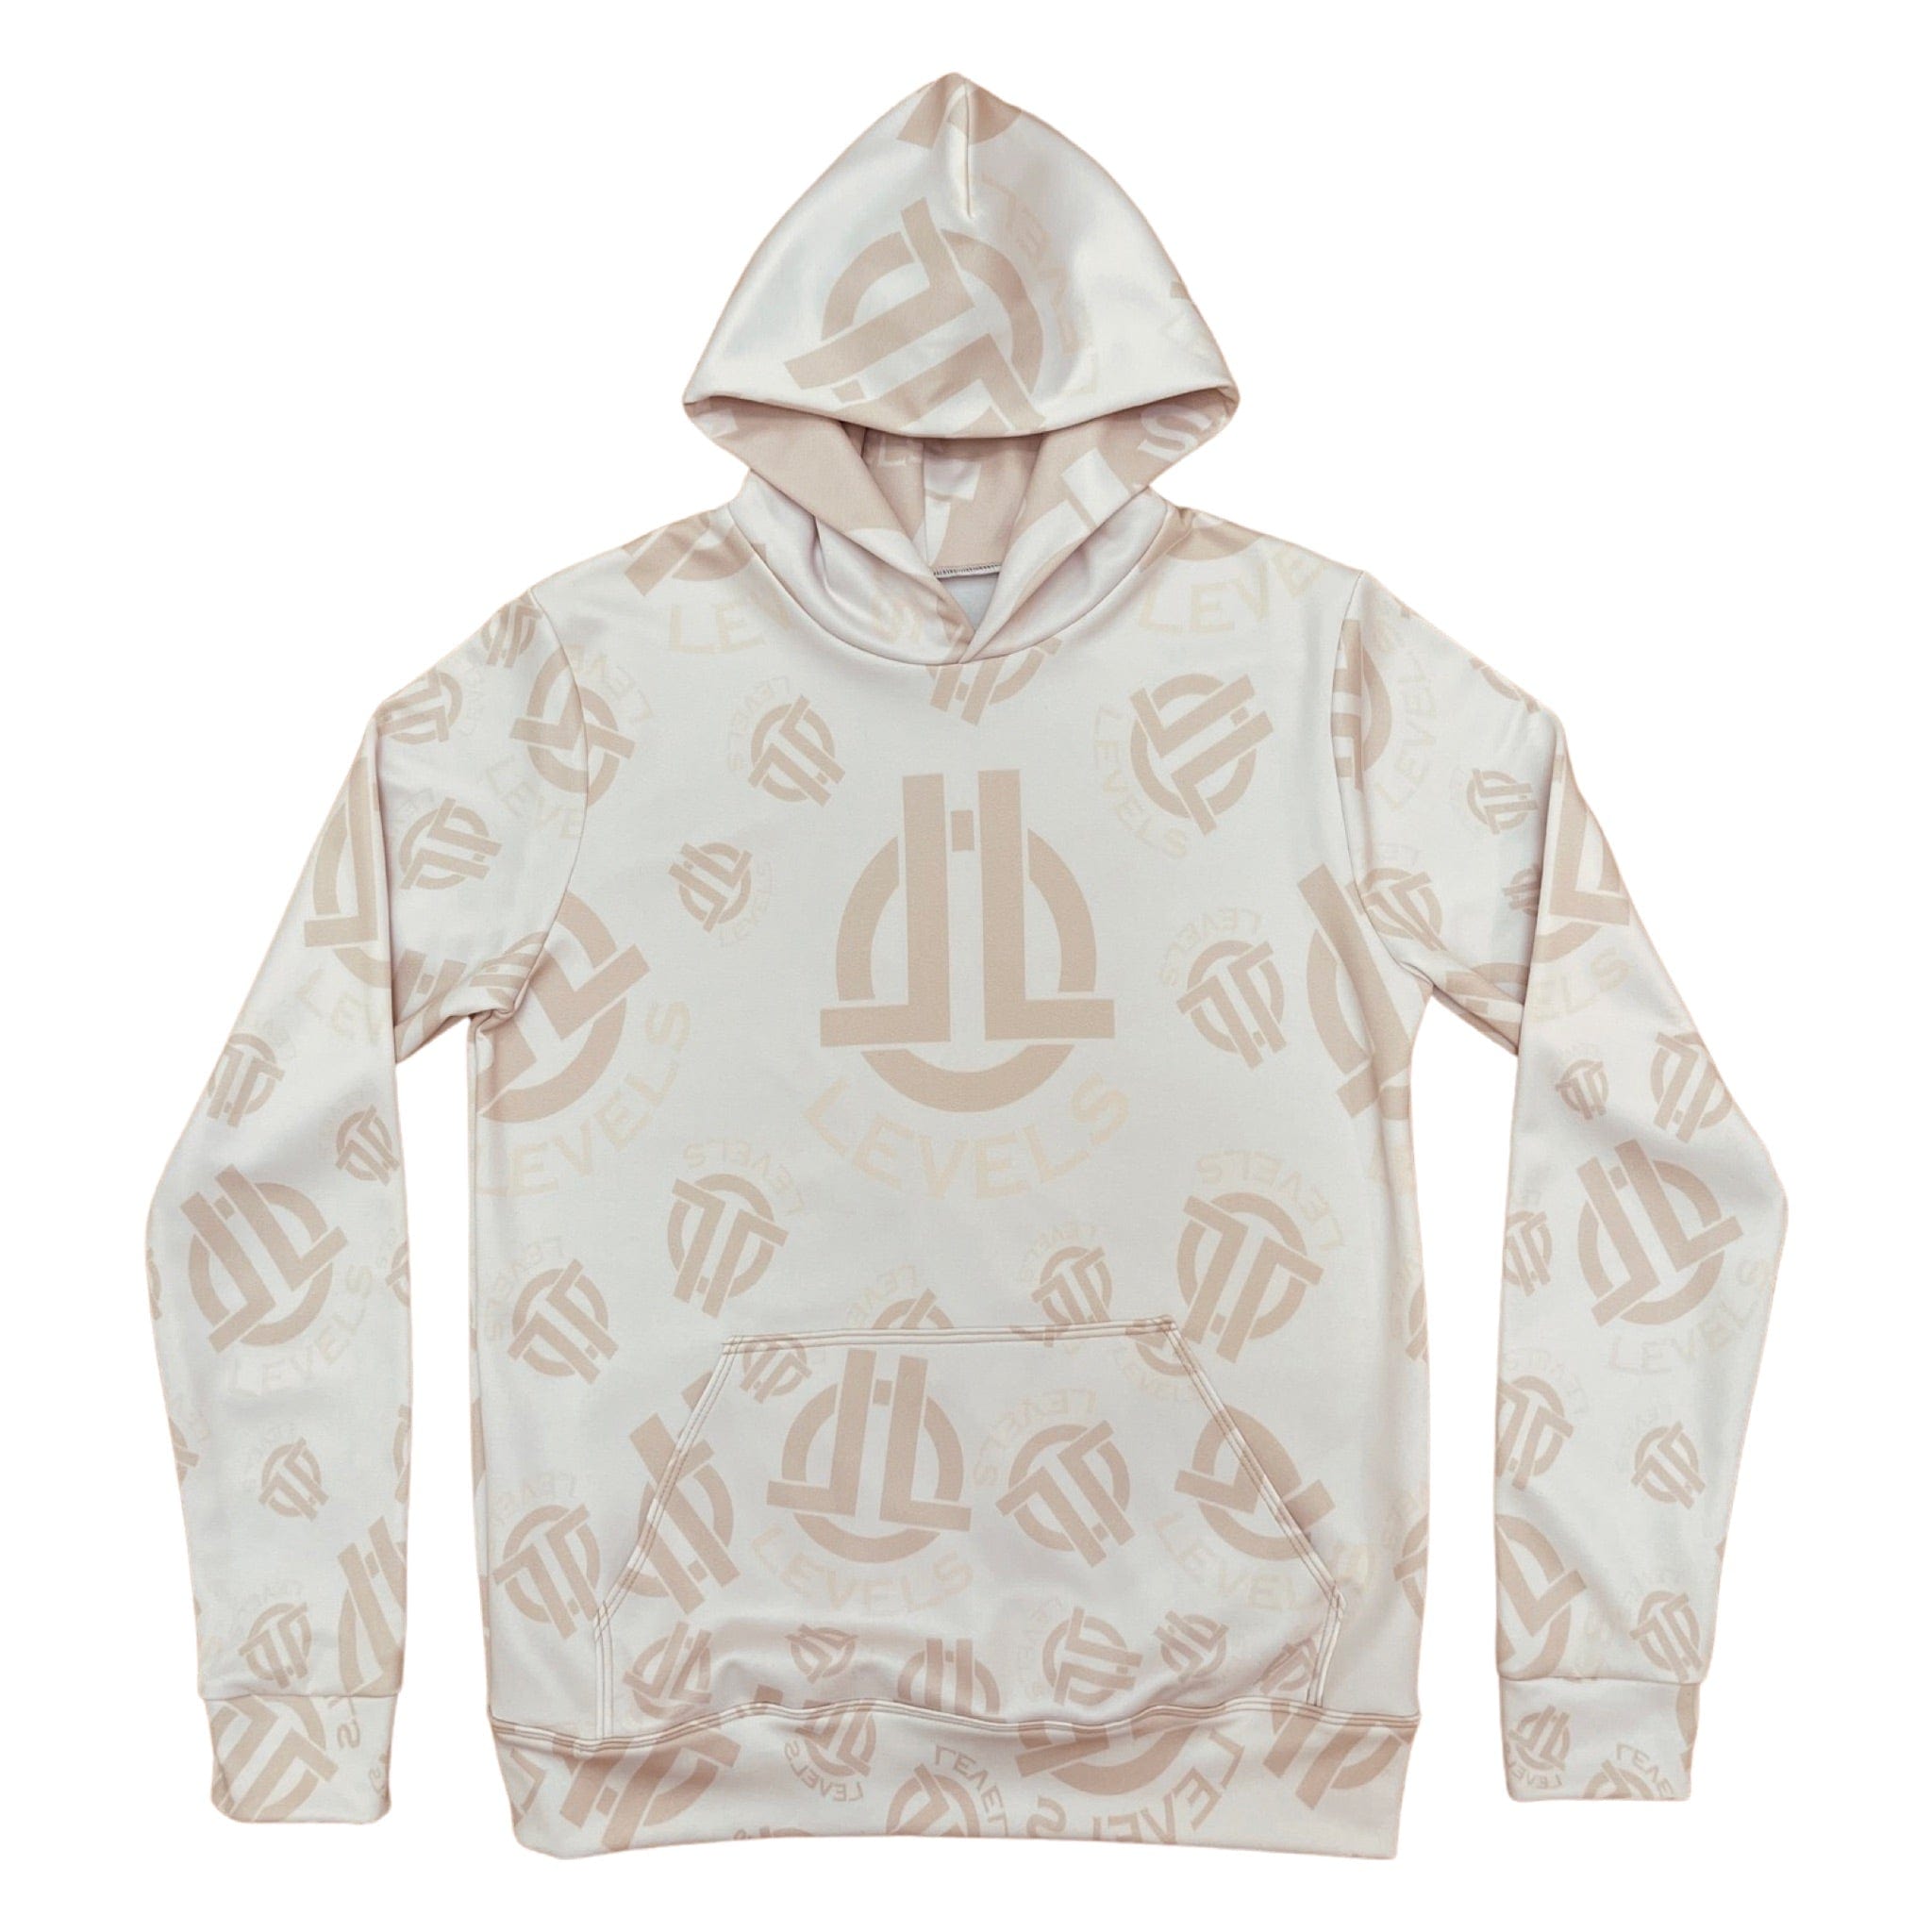 LEVELS, LLC Apparel & Accessories LEVELS SIGNATURE HOODIE (NUDE) 2ND EDITION